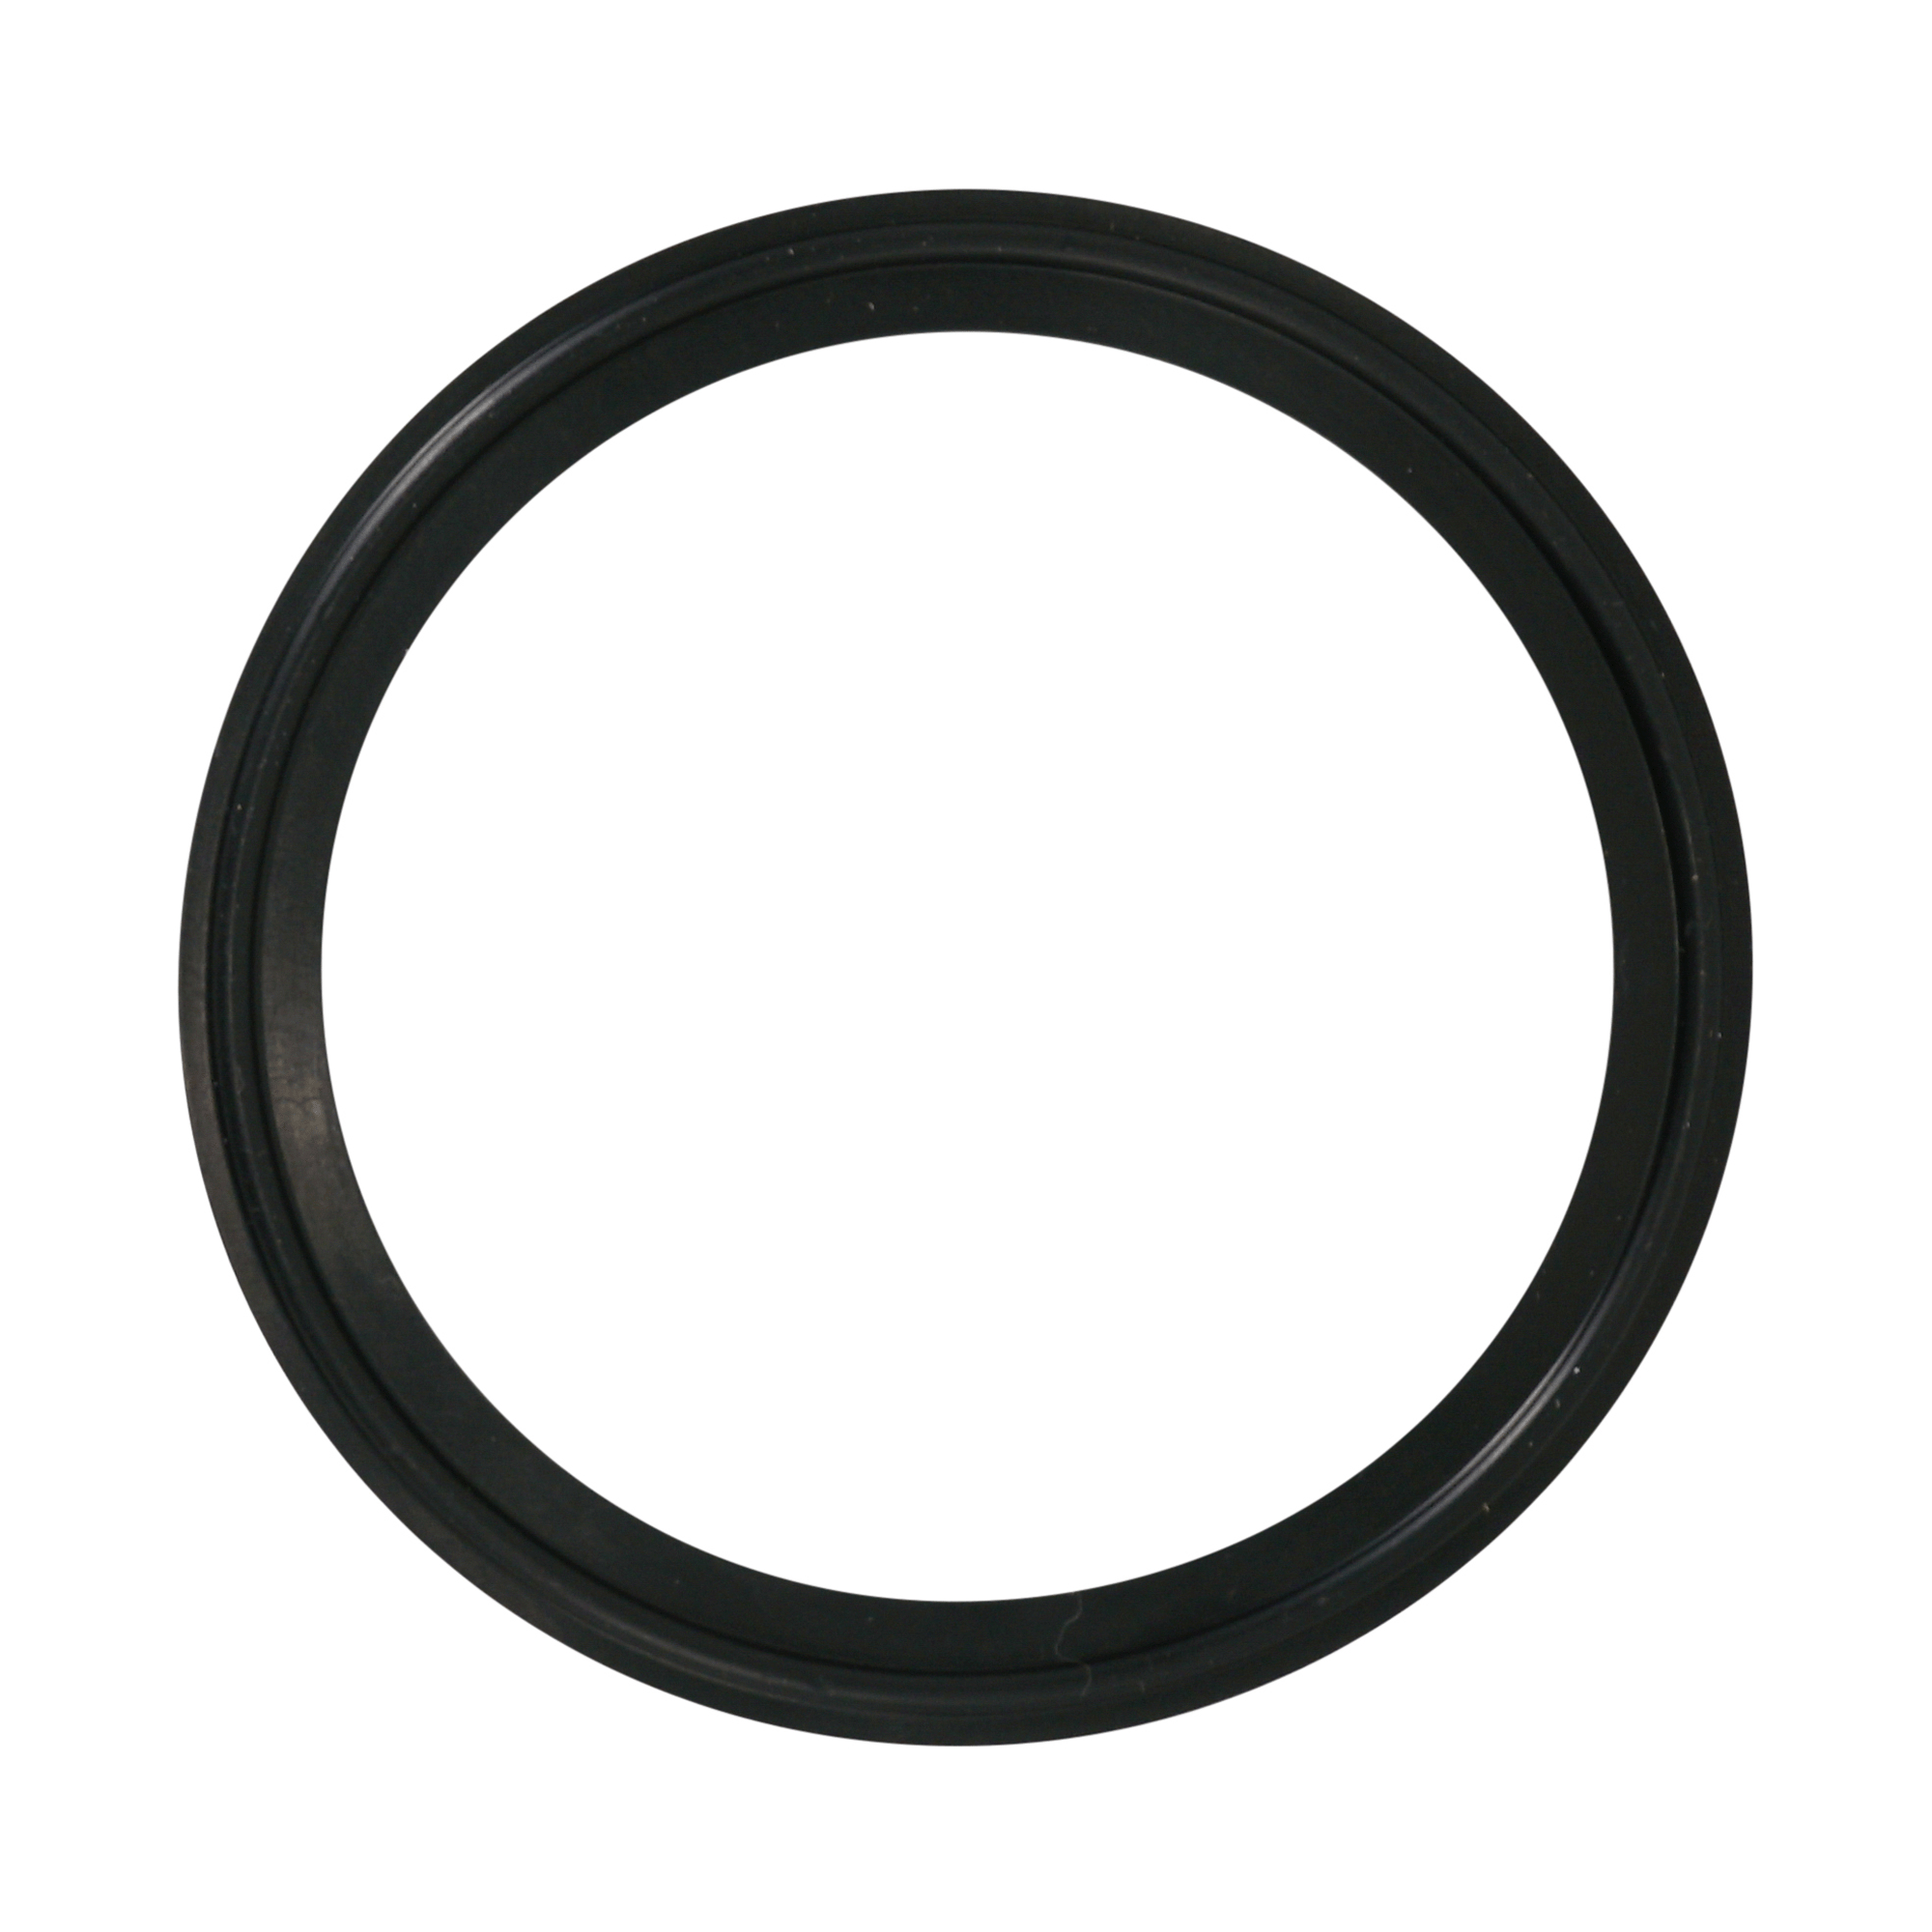 Rubber Gasket: What Is It? How Is it Used? Types of